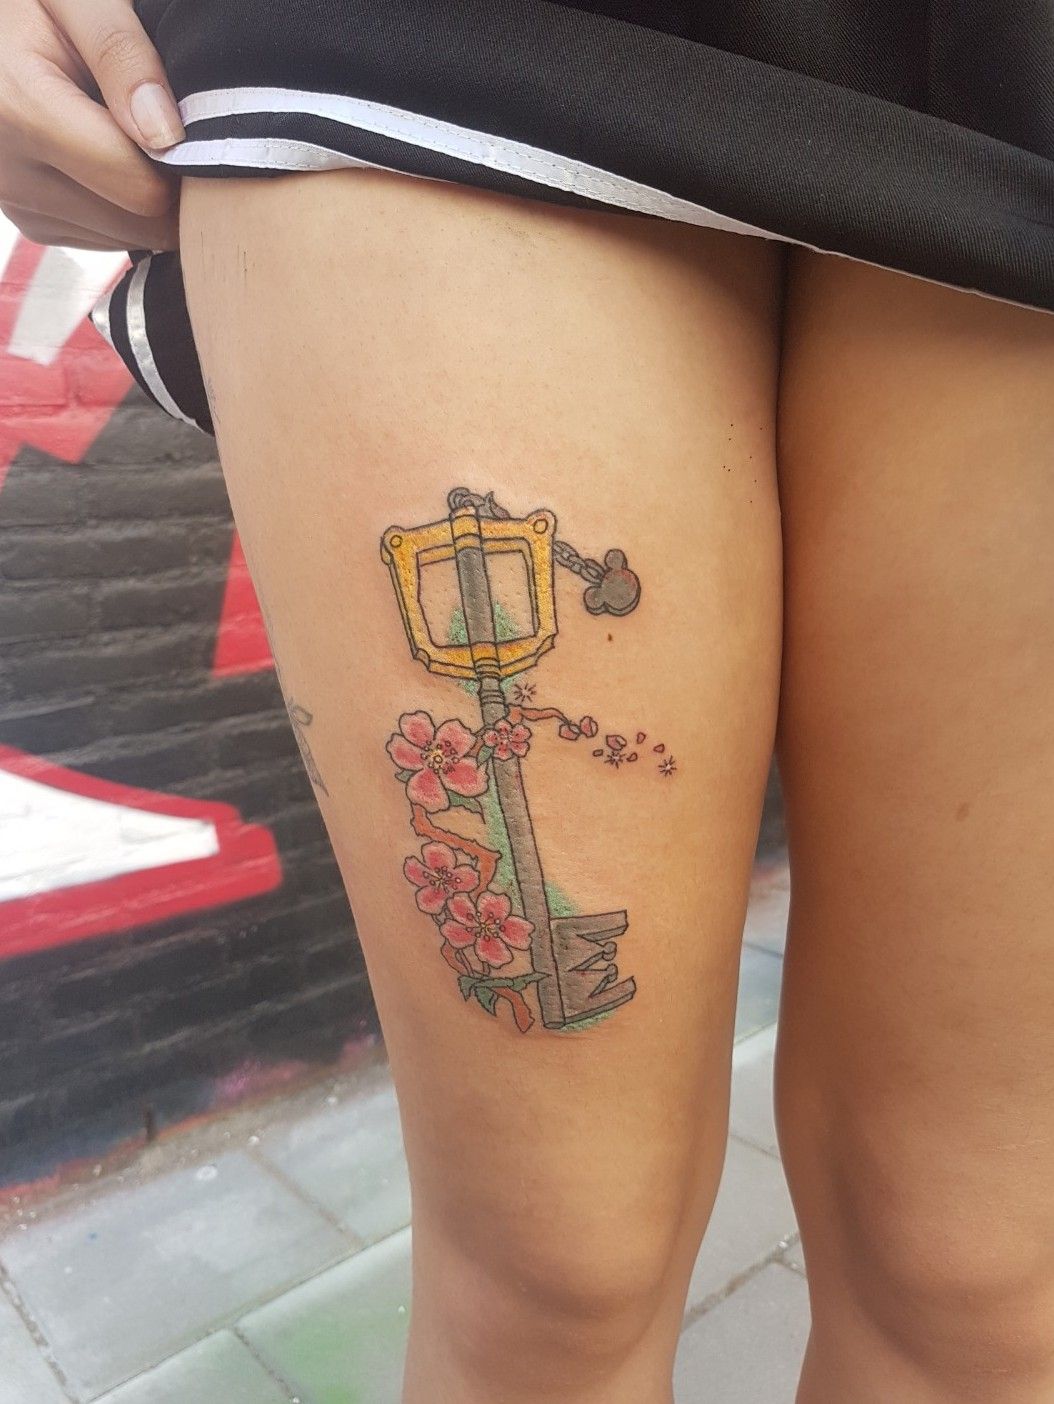 Share more than 157 small keyblade tattoo best